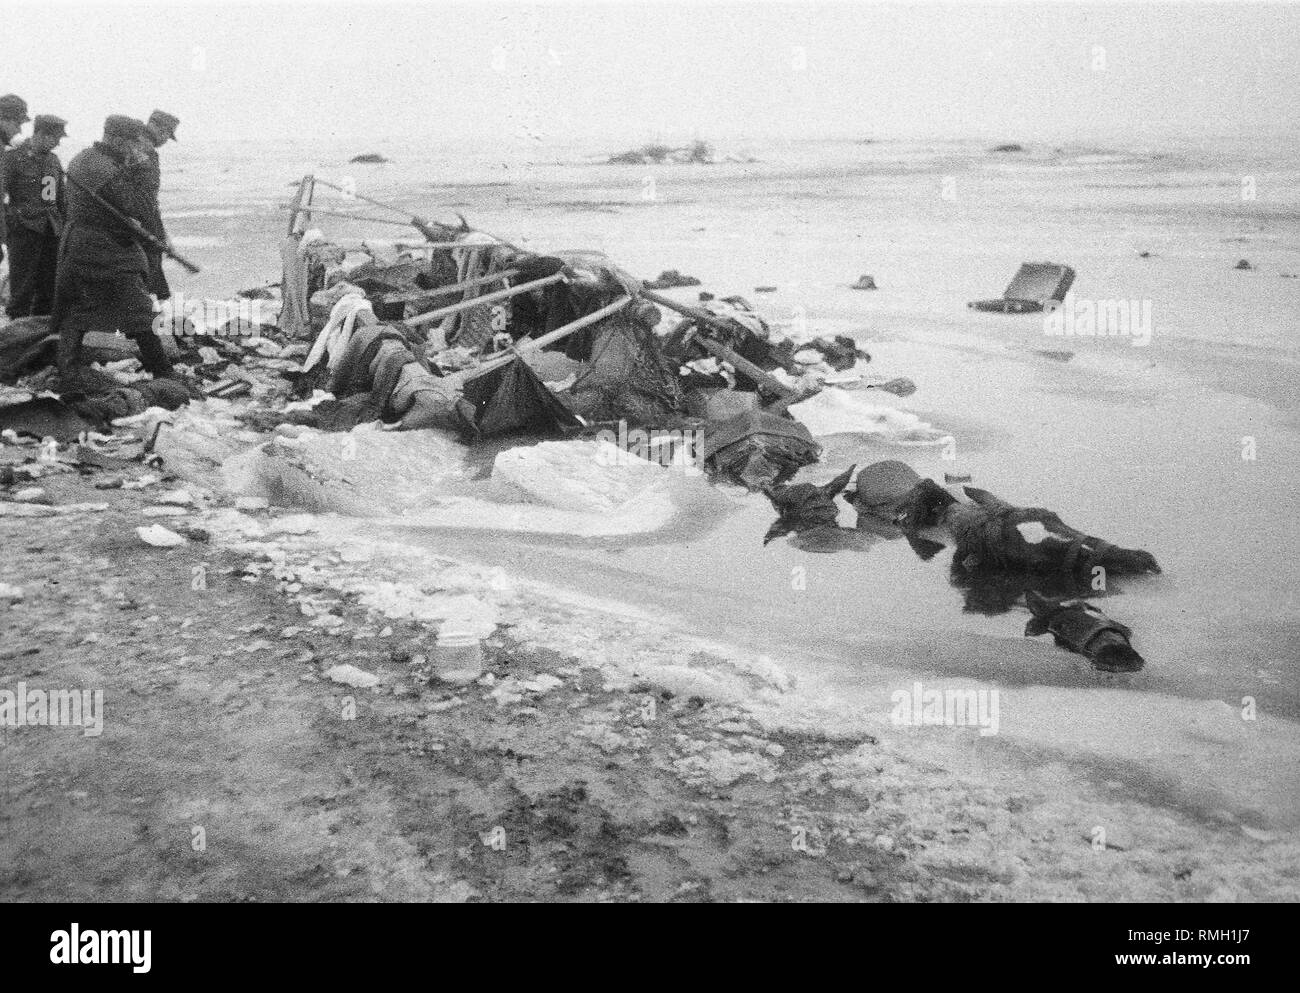 Soldiers at a wagon under which the ice has broken, the horses of which have died in an ice hole. At the beginning of February 1945, refugees trapped in the cauldron of East Prussia attempt to flee over the ice of the Fresh Bay to the Vistula Spit in order to reach along the Baltic Sea coast of Gdansk. The picture was taken by Theodor Vonolfen, a soldier of a Luftwaffe unit, deployed there at that time. Stock Photo